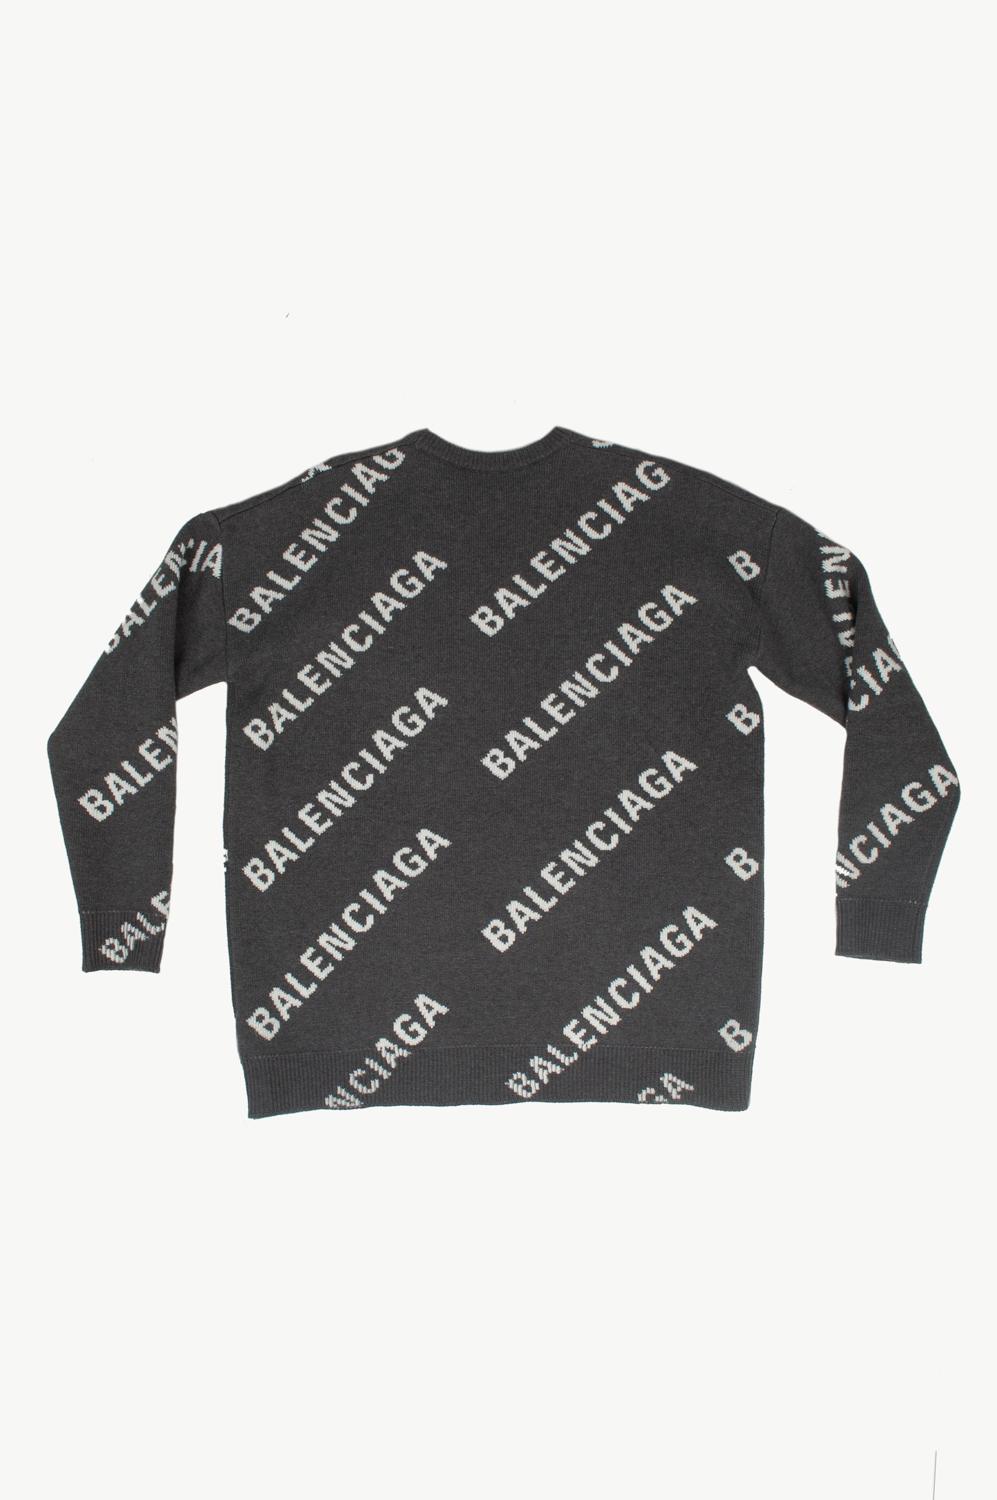 100% genuine Balenciaga Crew Neck Logo Sweater, S628
Color: grey
(An actual color may a bit vary due to individual computer screen interpretation)
Material: 50% cotton, 22% wool, 21% acrylic, 2% polyamide
Tag size: M
This sweater is great quality